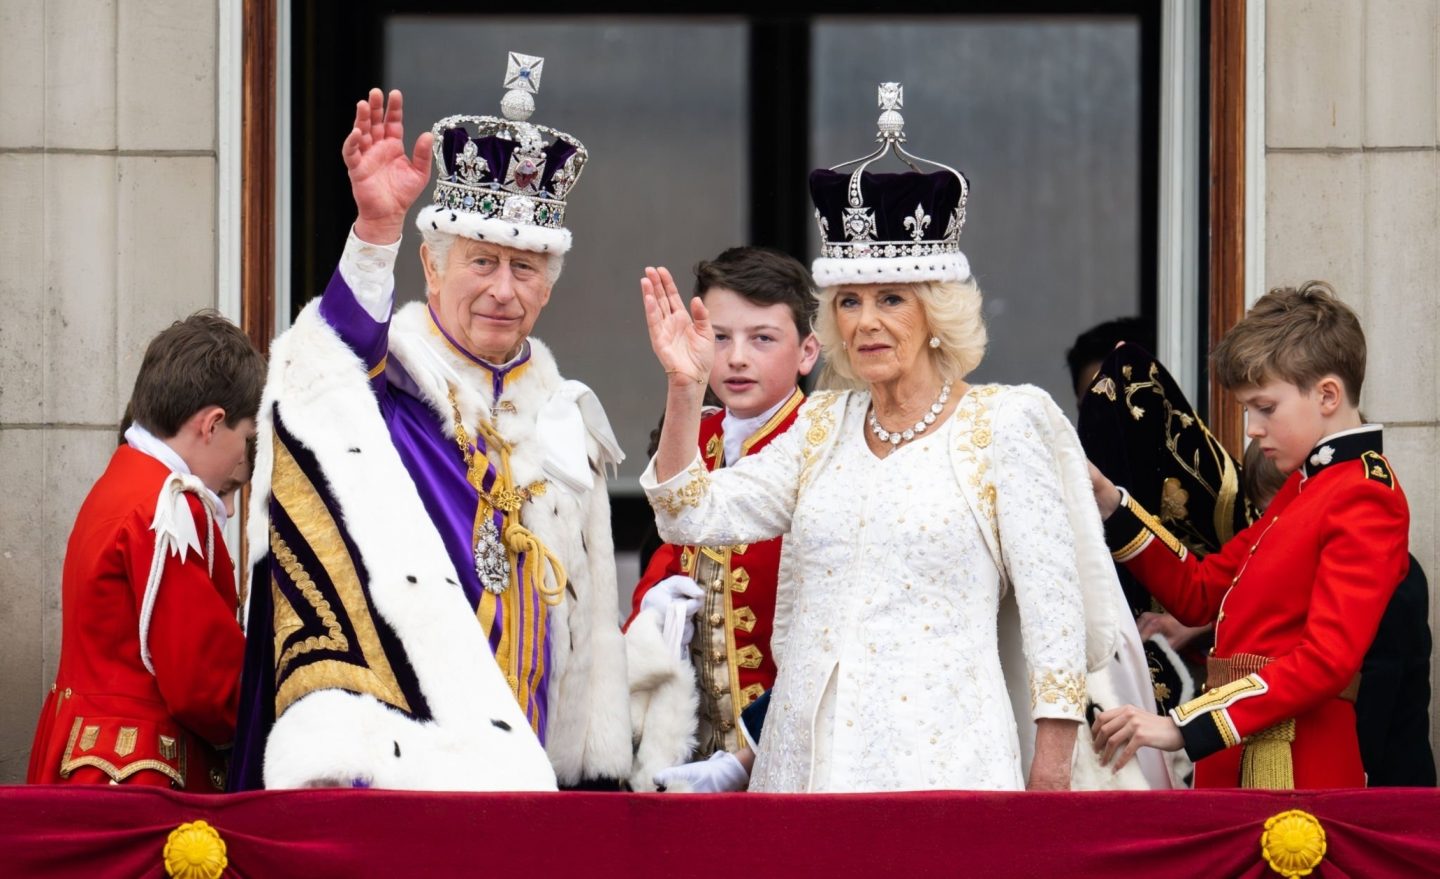 Picture of King Charles III and his wife wearing crowns containing disputed precious stones